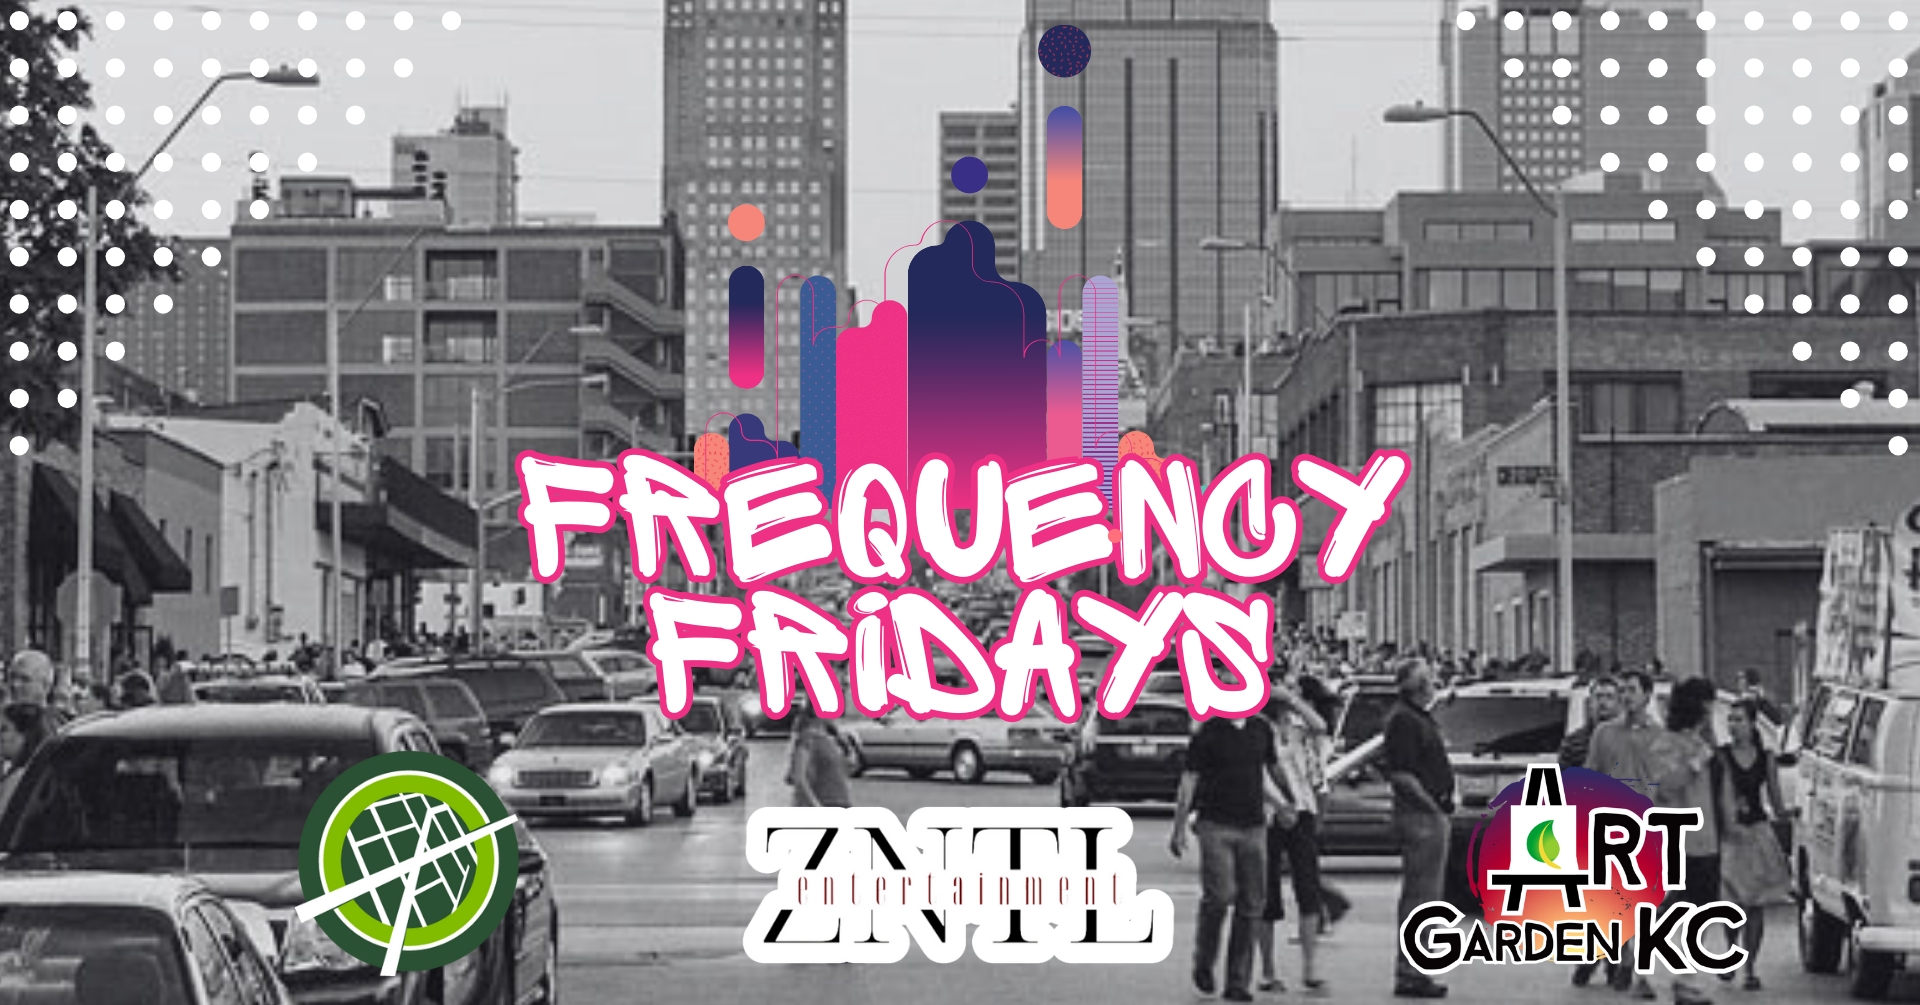 Frequency Fridays in the Crossroads by Art Garden KC